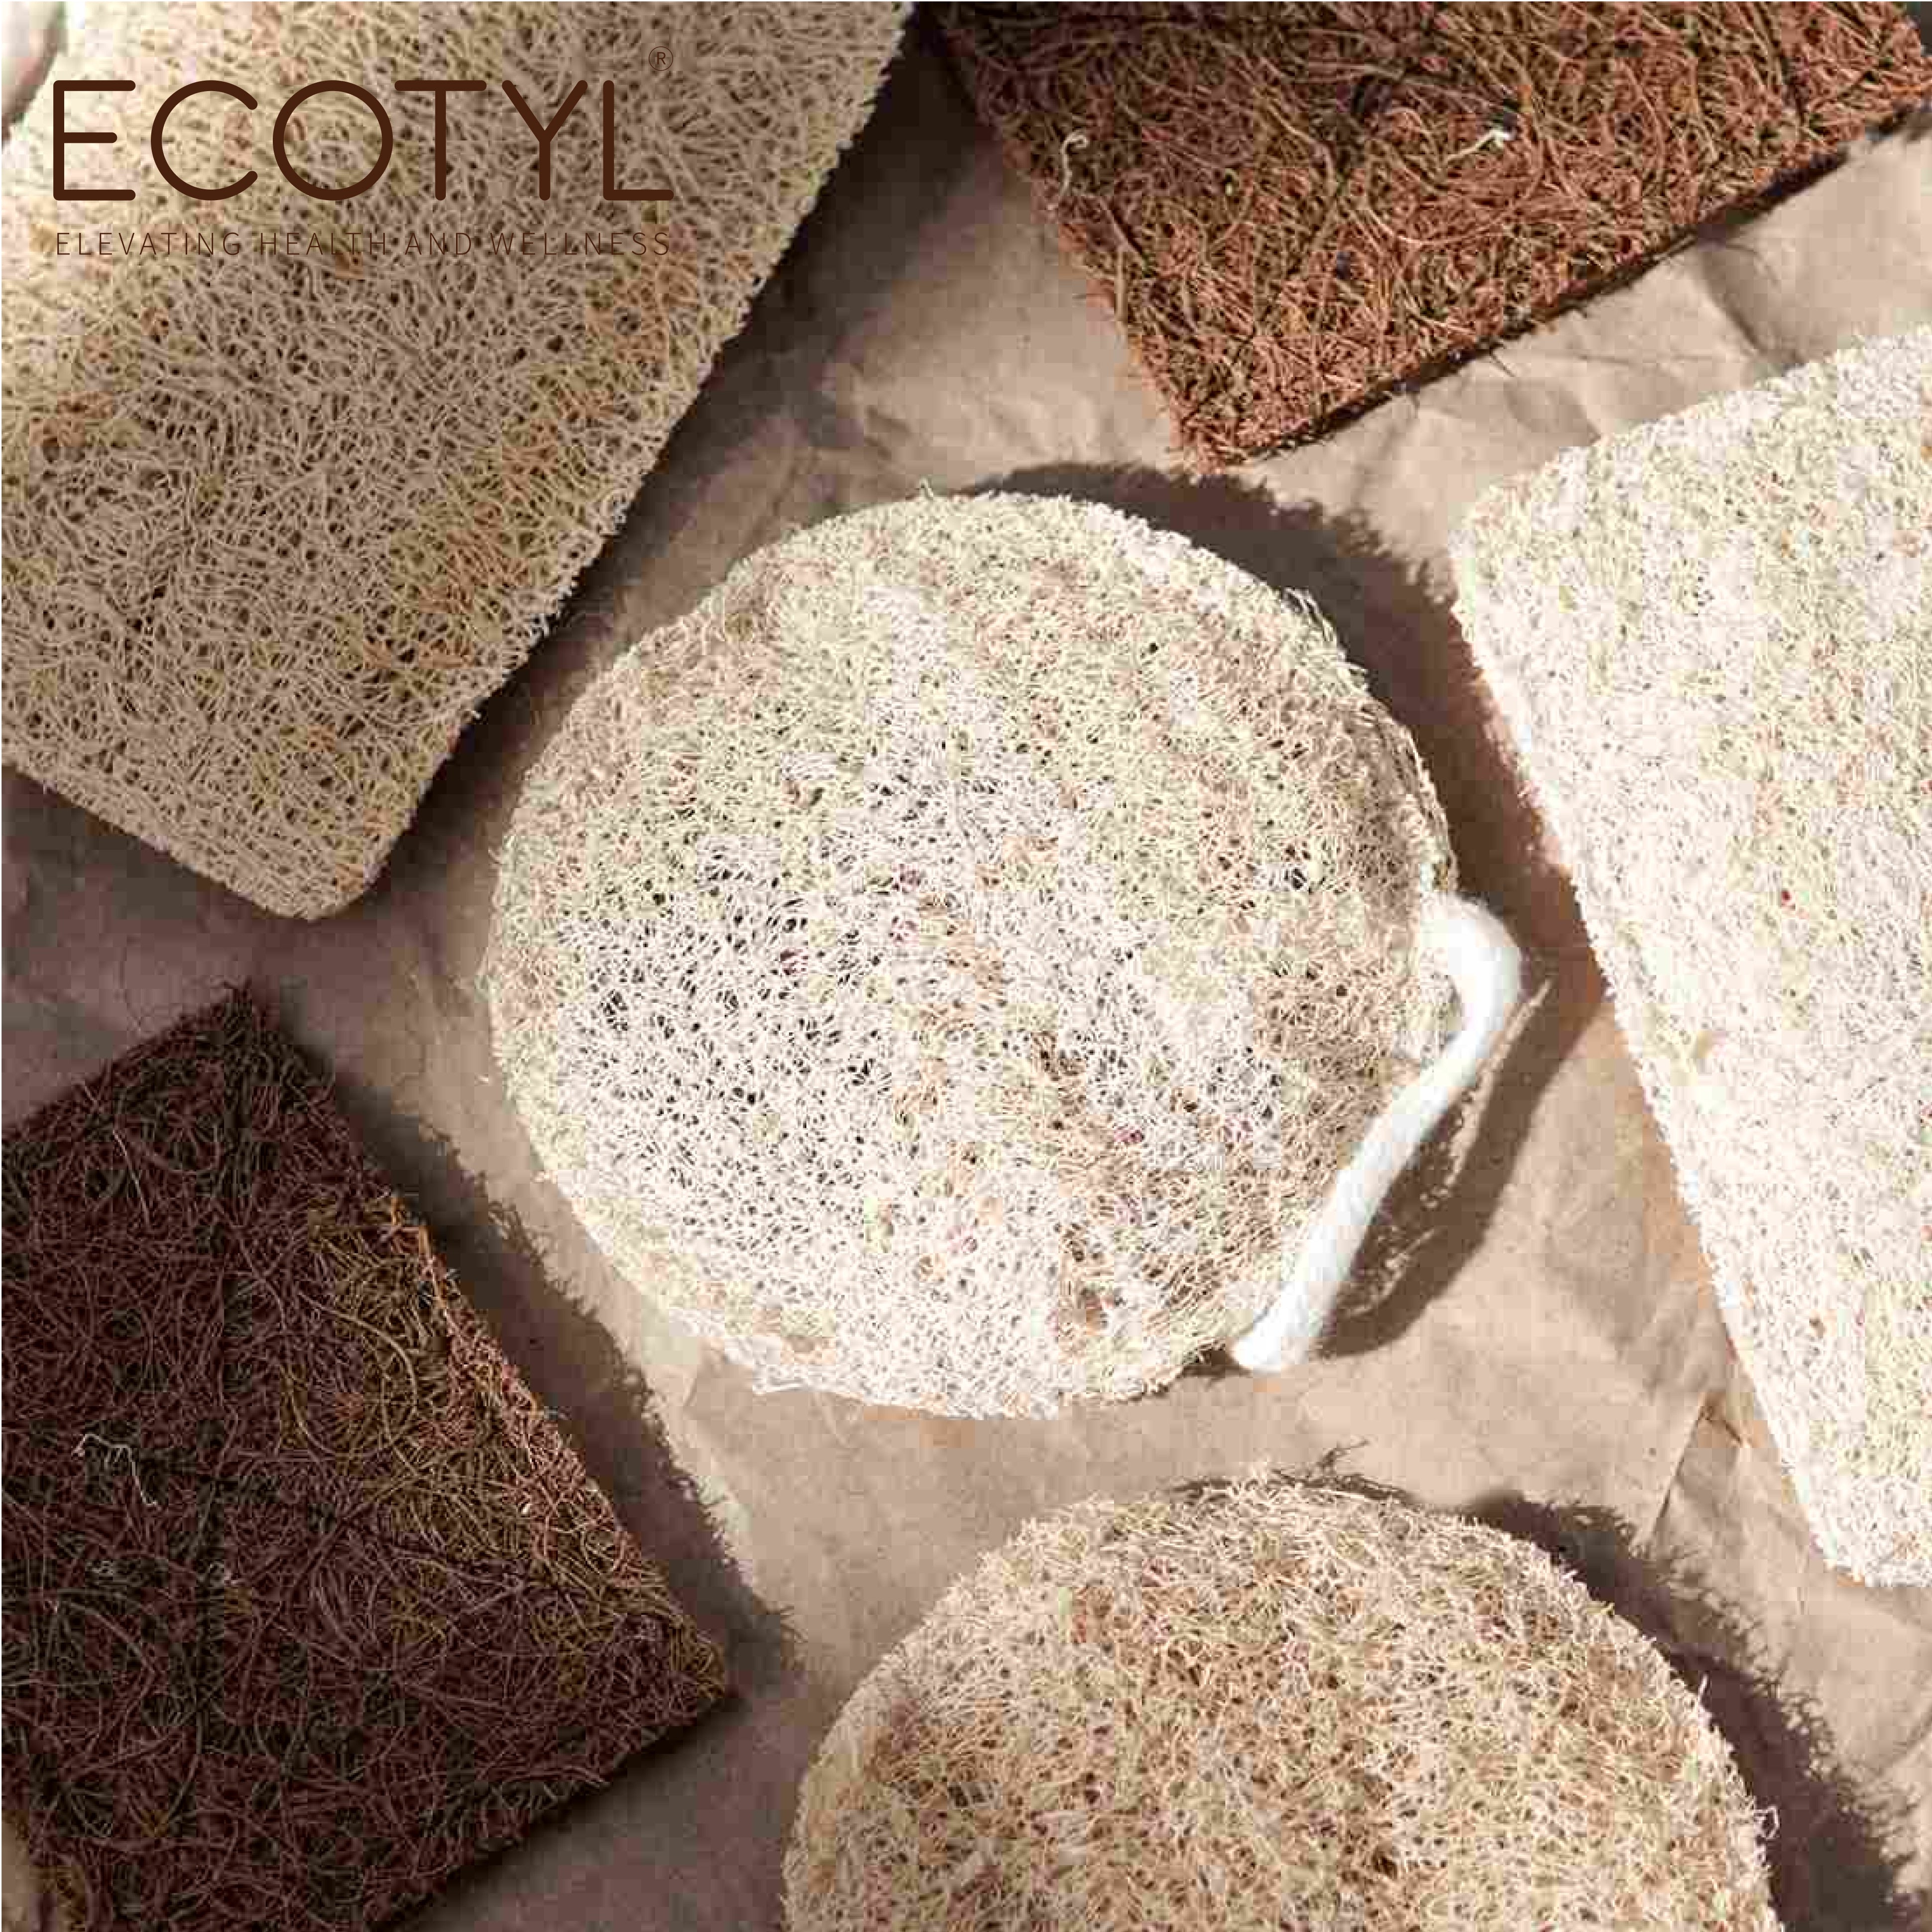 Ecotyl Body Loofah | For Gentle Exfoliation | Natural Loofah | Set of 2